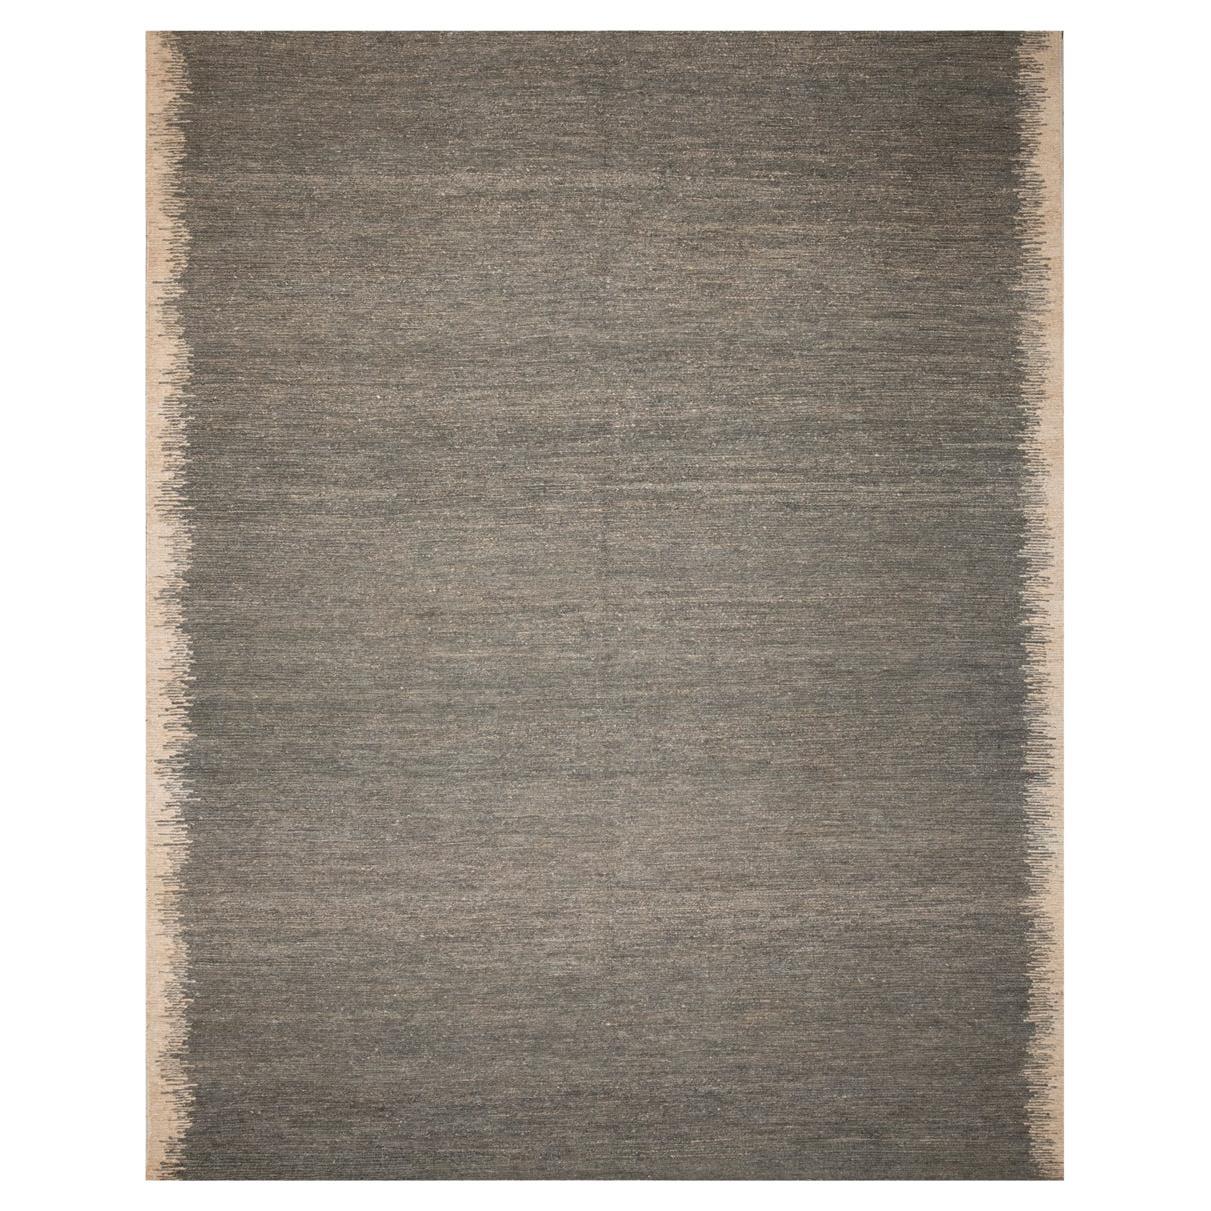 Modern Hand Braided Jute Carpet Rug in Grey&Ivory degraded Shades For Sale